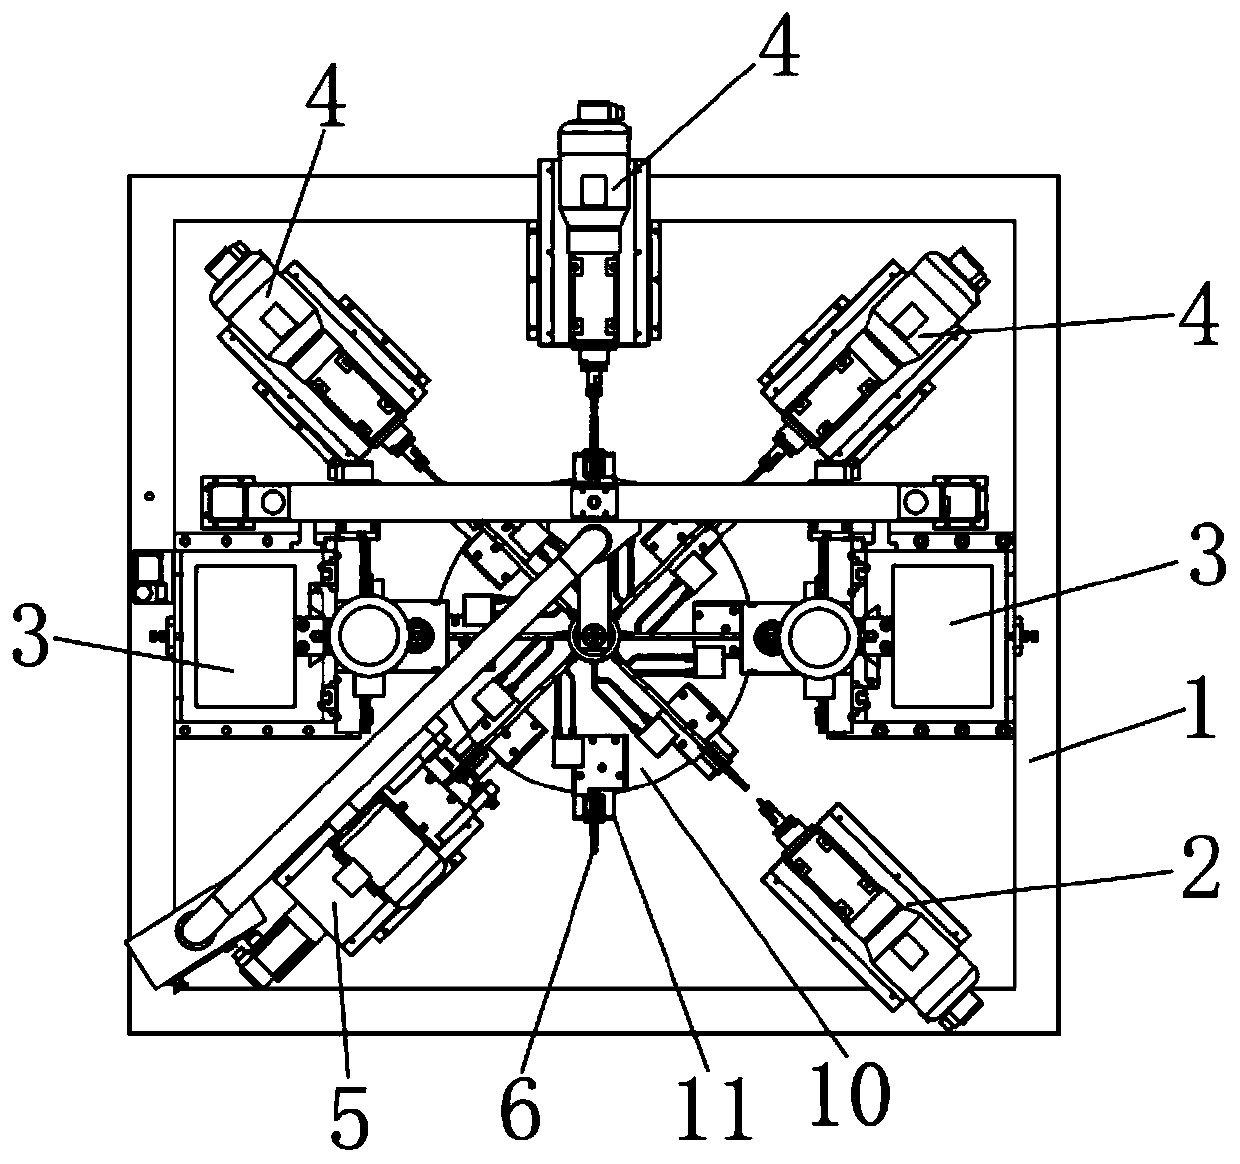 Composite processing device for a movable wrench